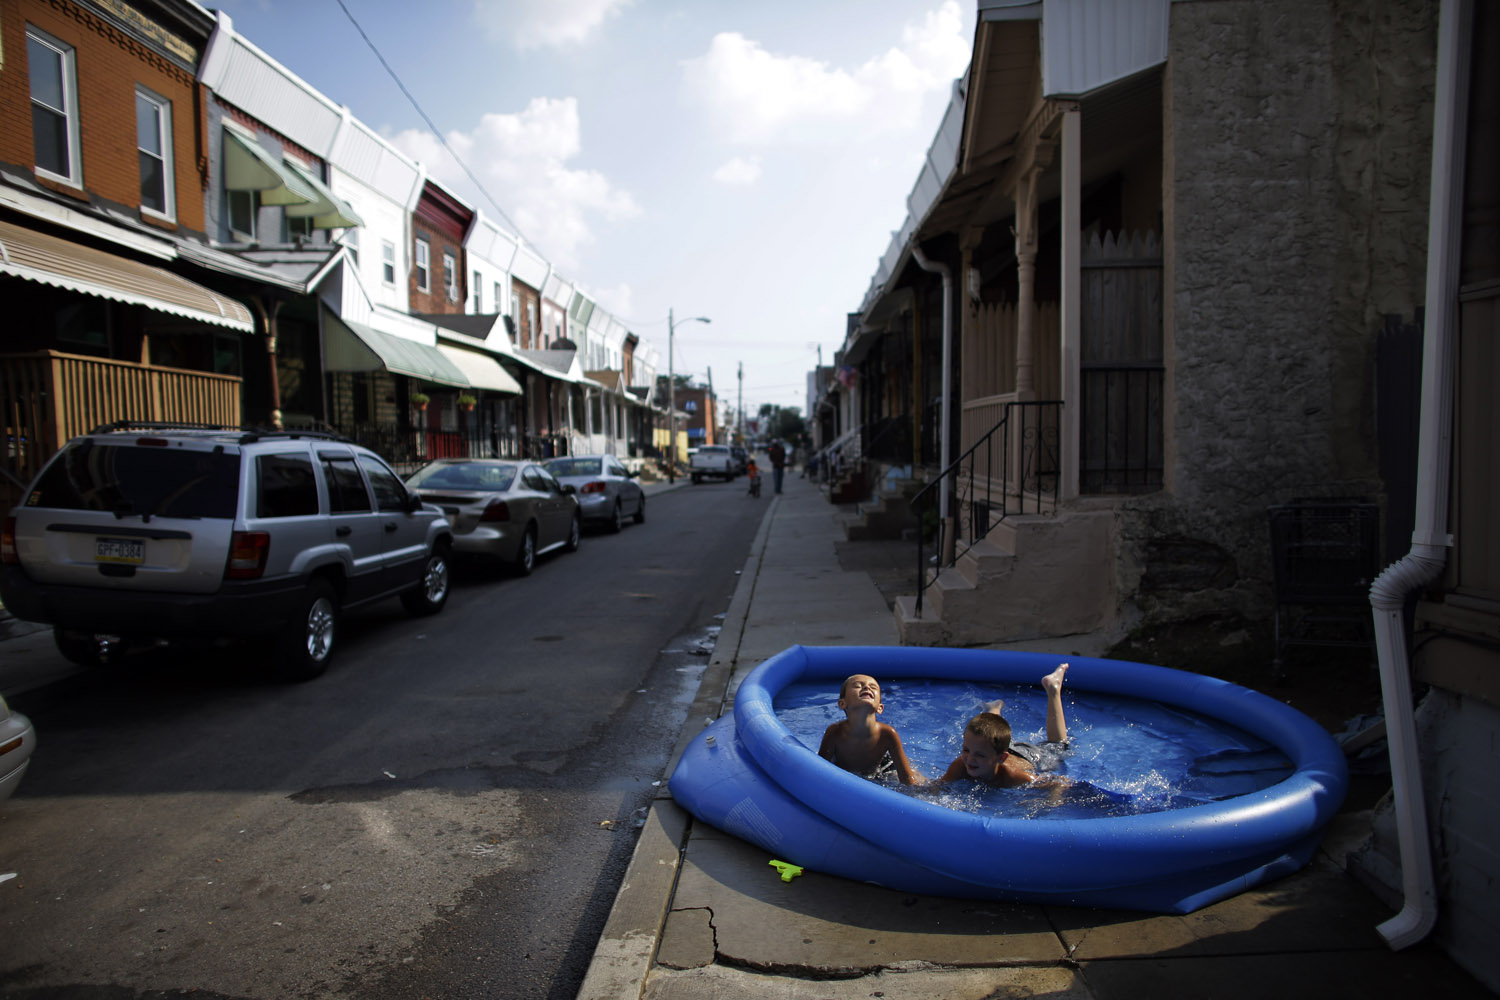 July 16, 2012. Joey Potts, left, 5, and his brother Jordan Kerver, 7, cool off in a wade pool in Philadelphia.